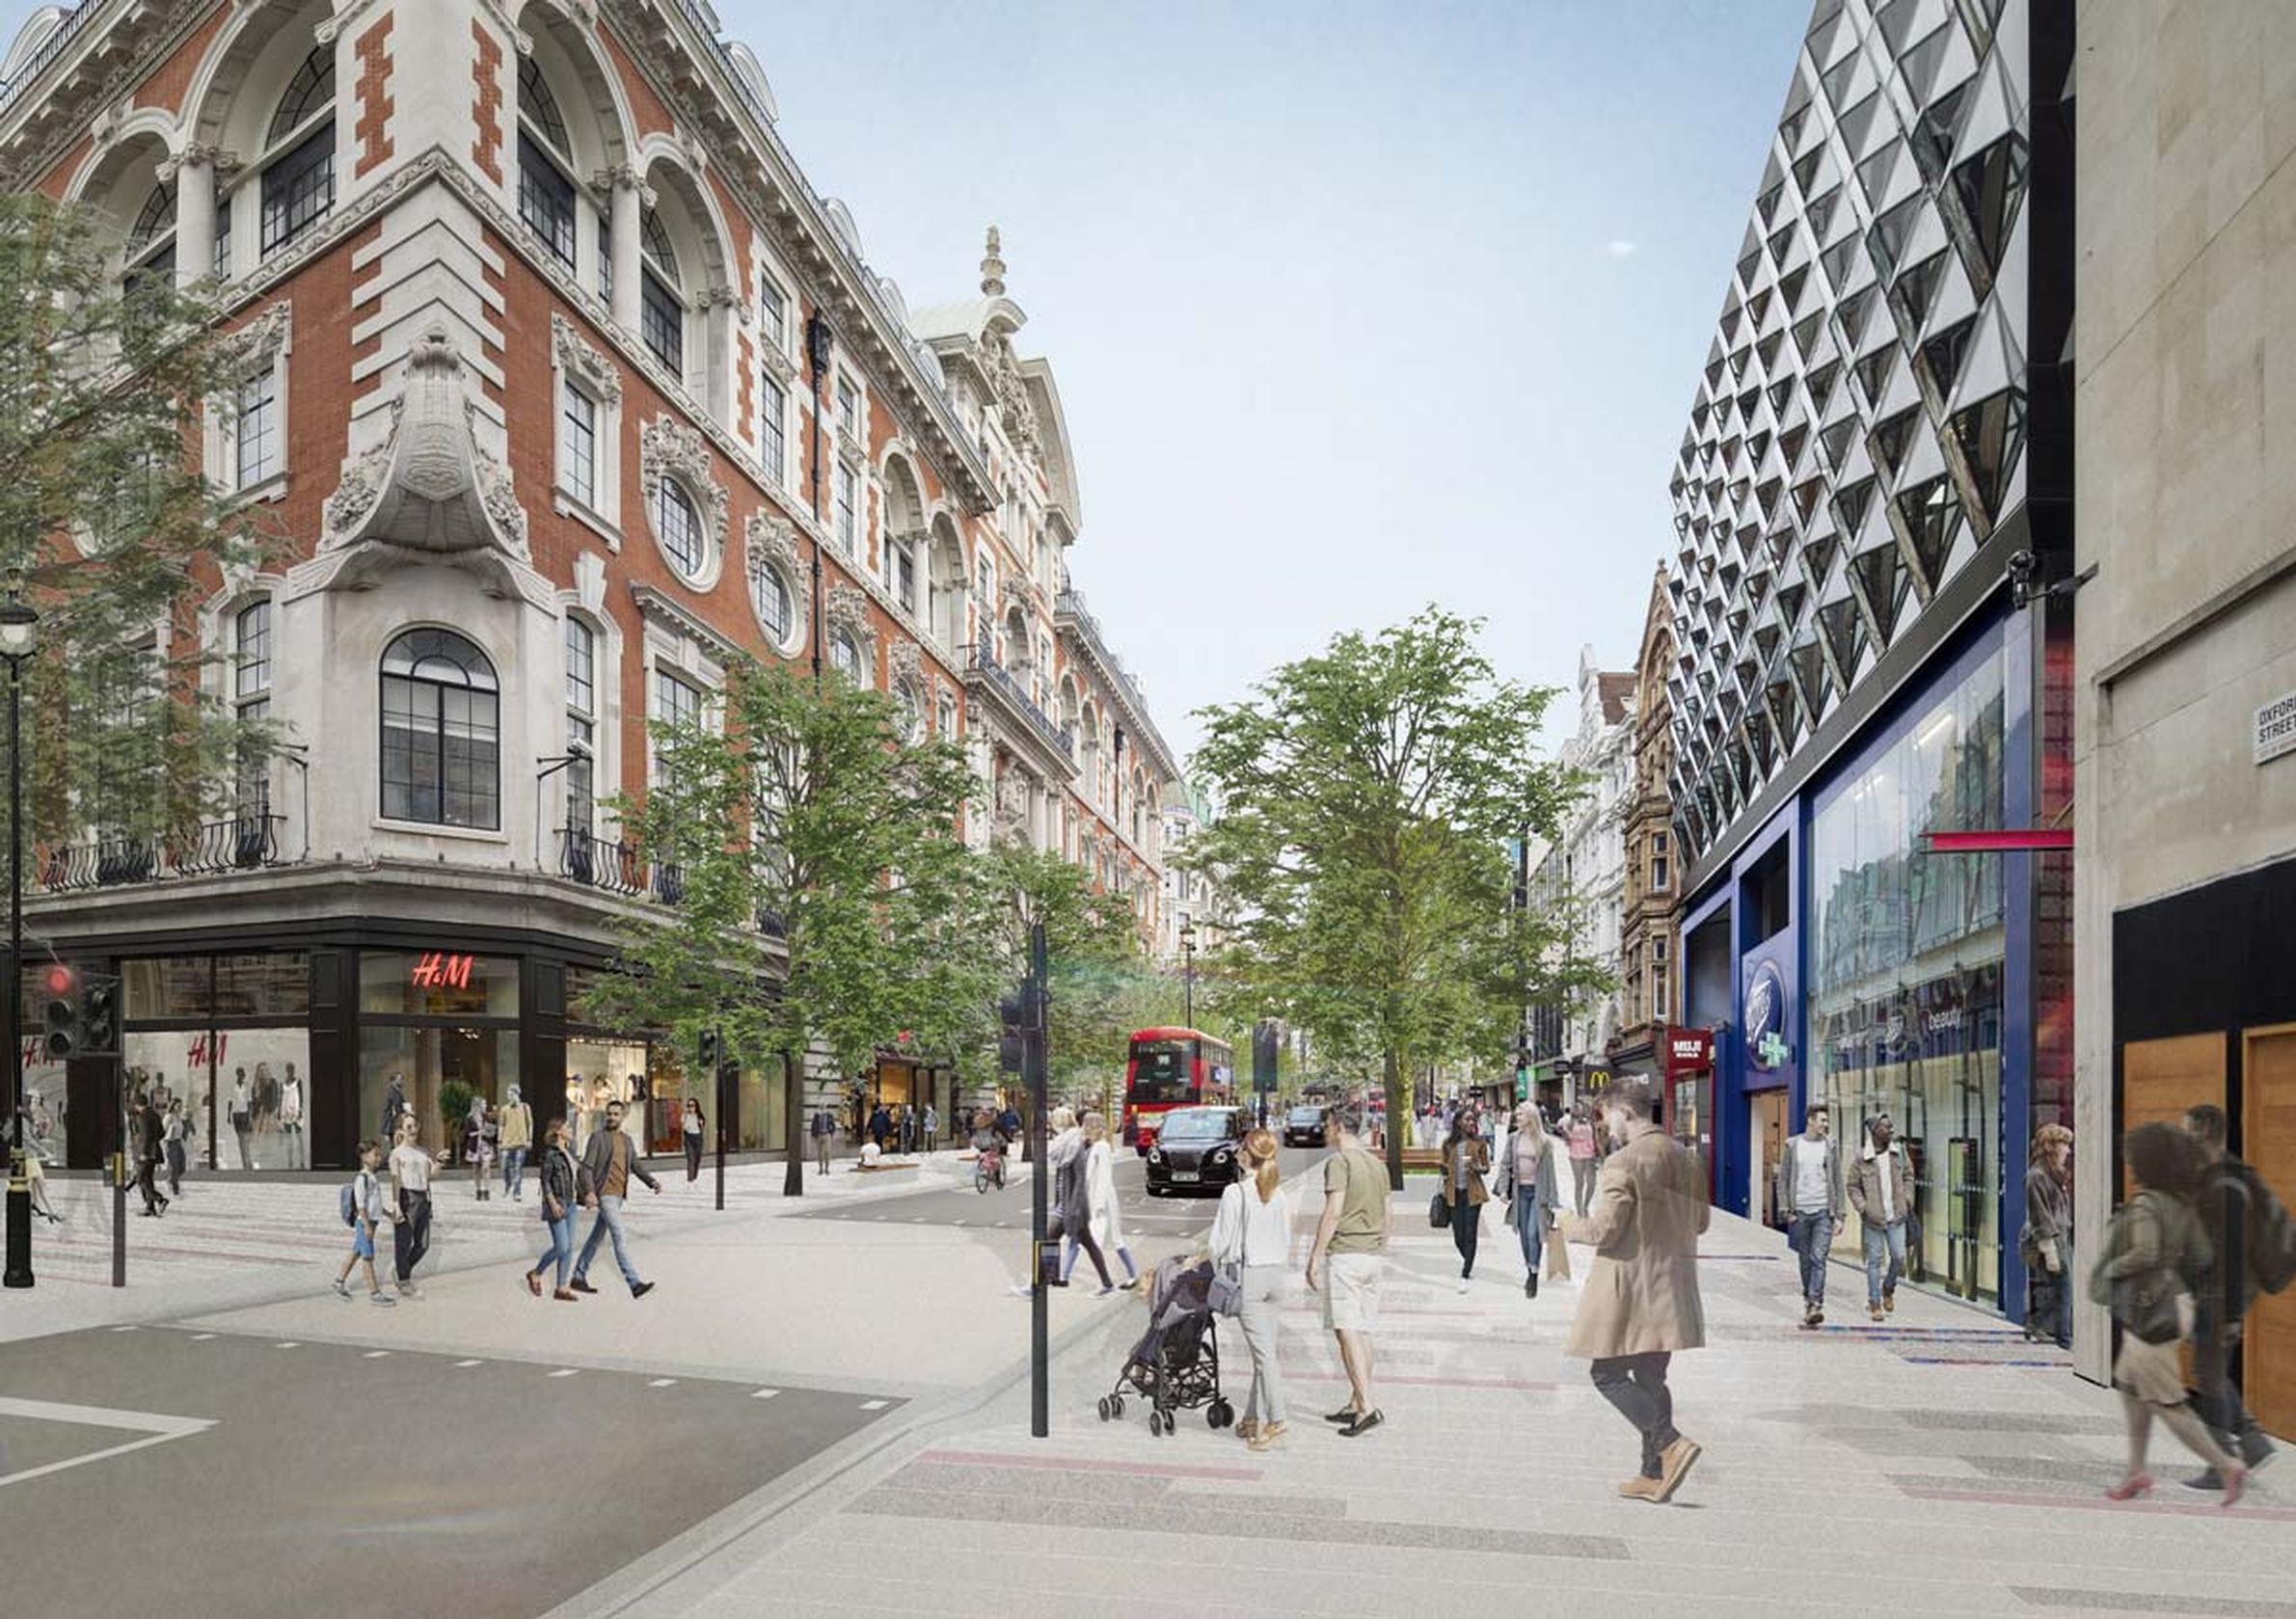 The Oxford Street Programme envisions Oxford Street as a vibrant, high quality public space for all who work, live or visit the street